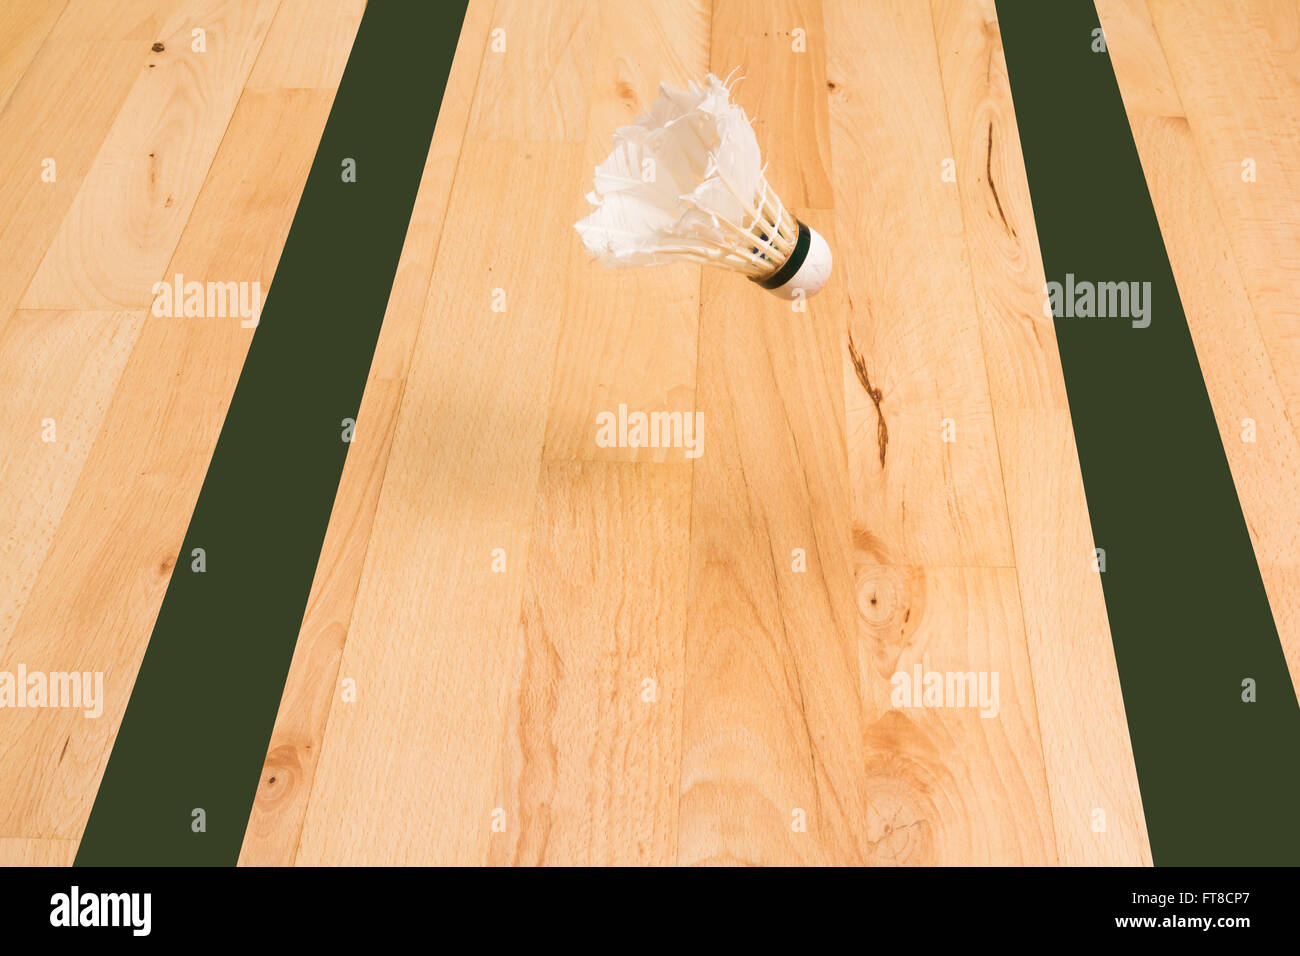 shuttlecock to land between the two outer green lines of a badminton court Stock Photo - Alamy